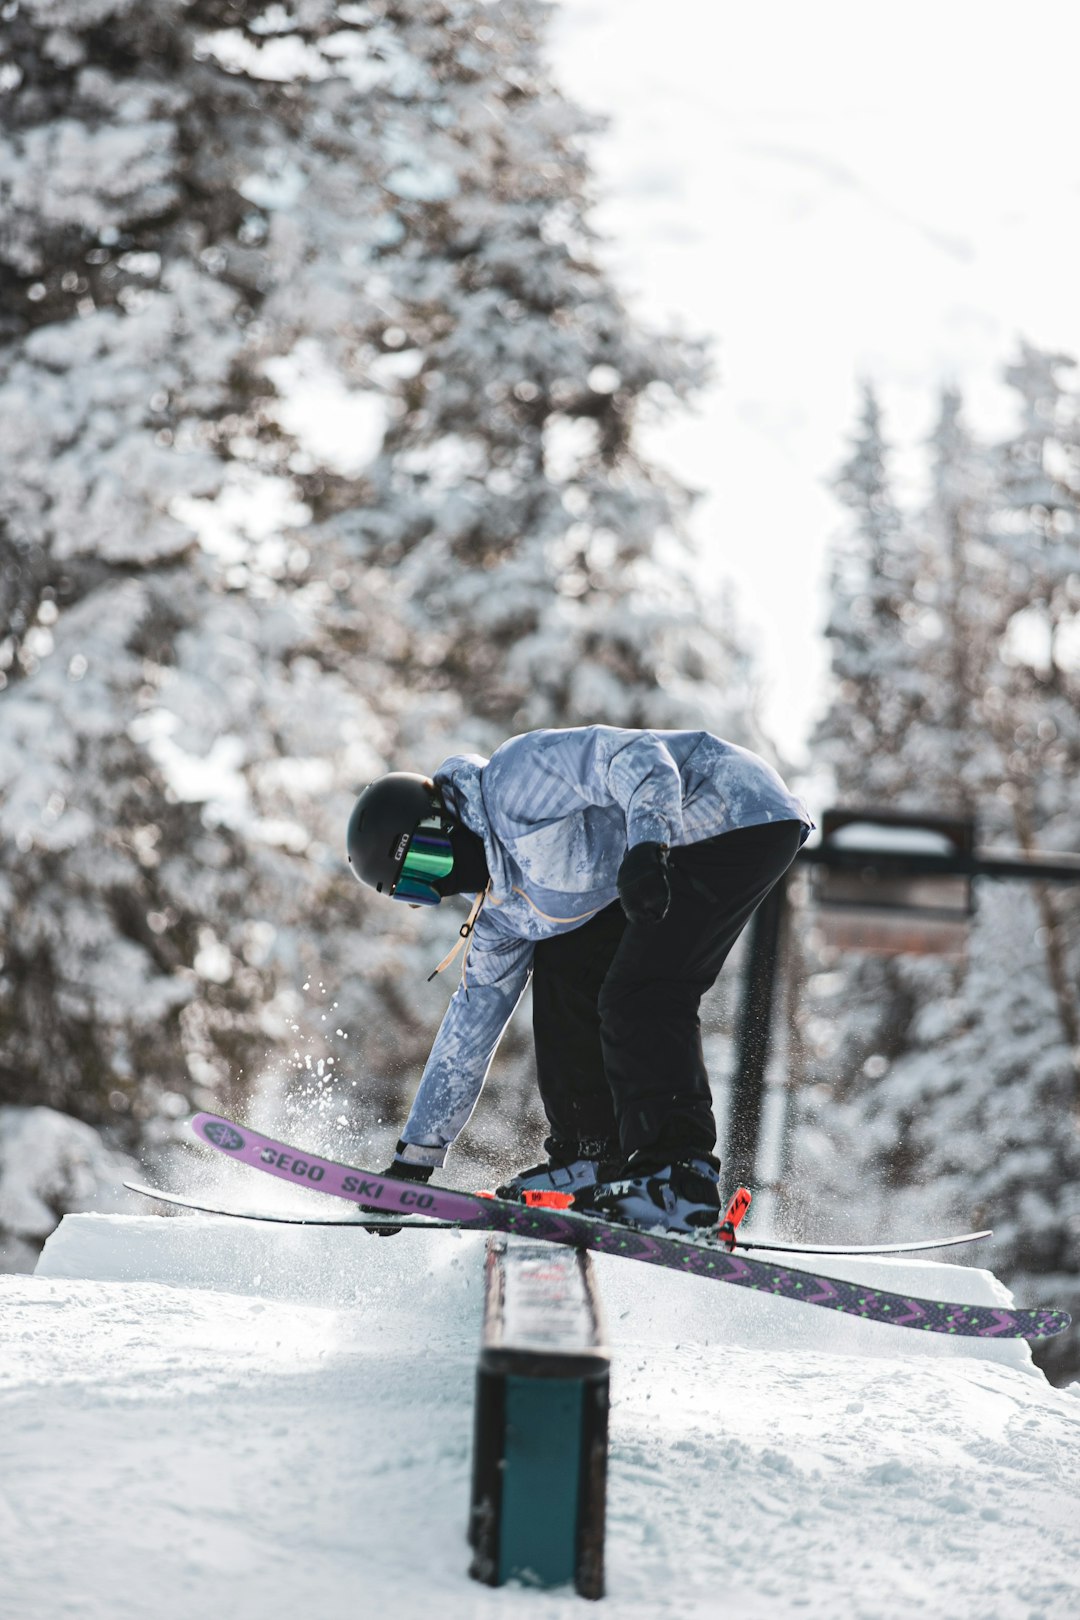 man in blue jacket and black pants riding on snowboard